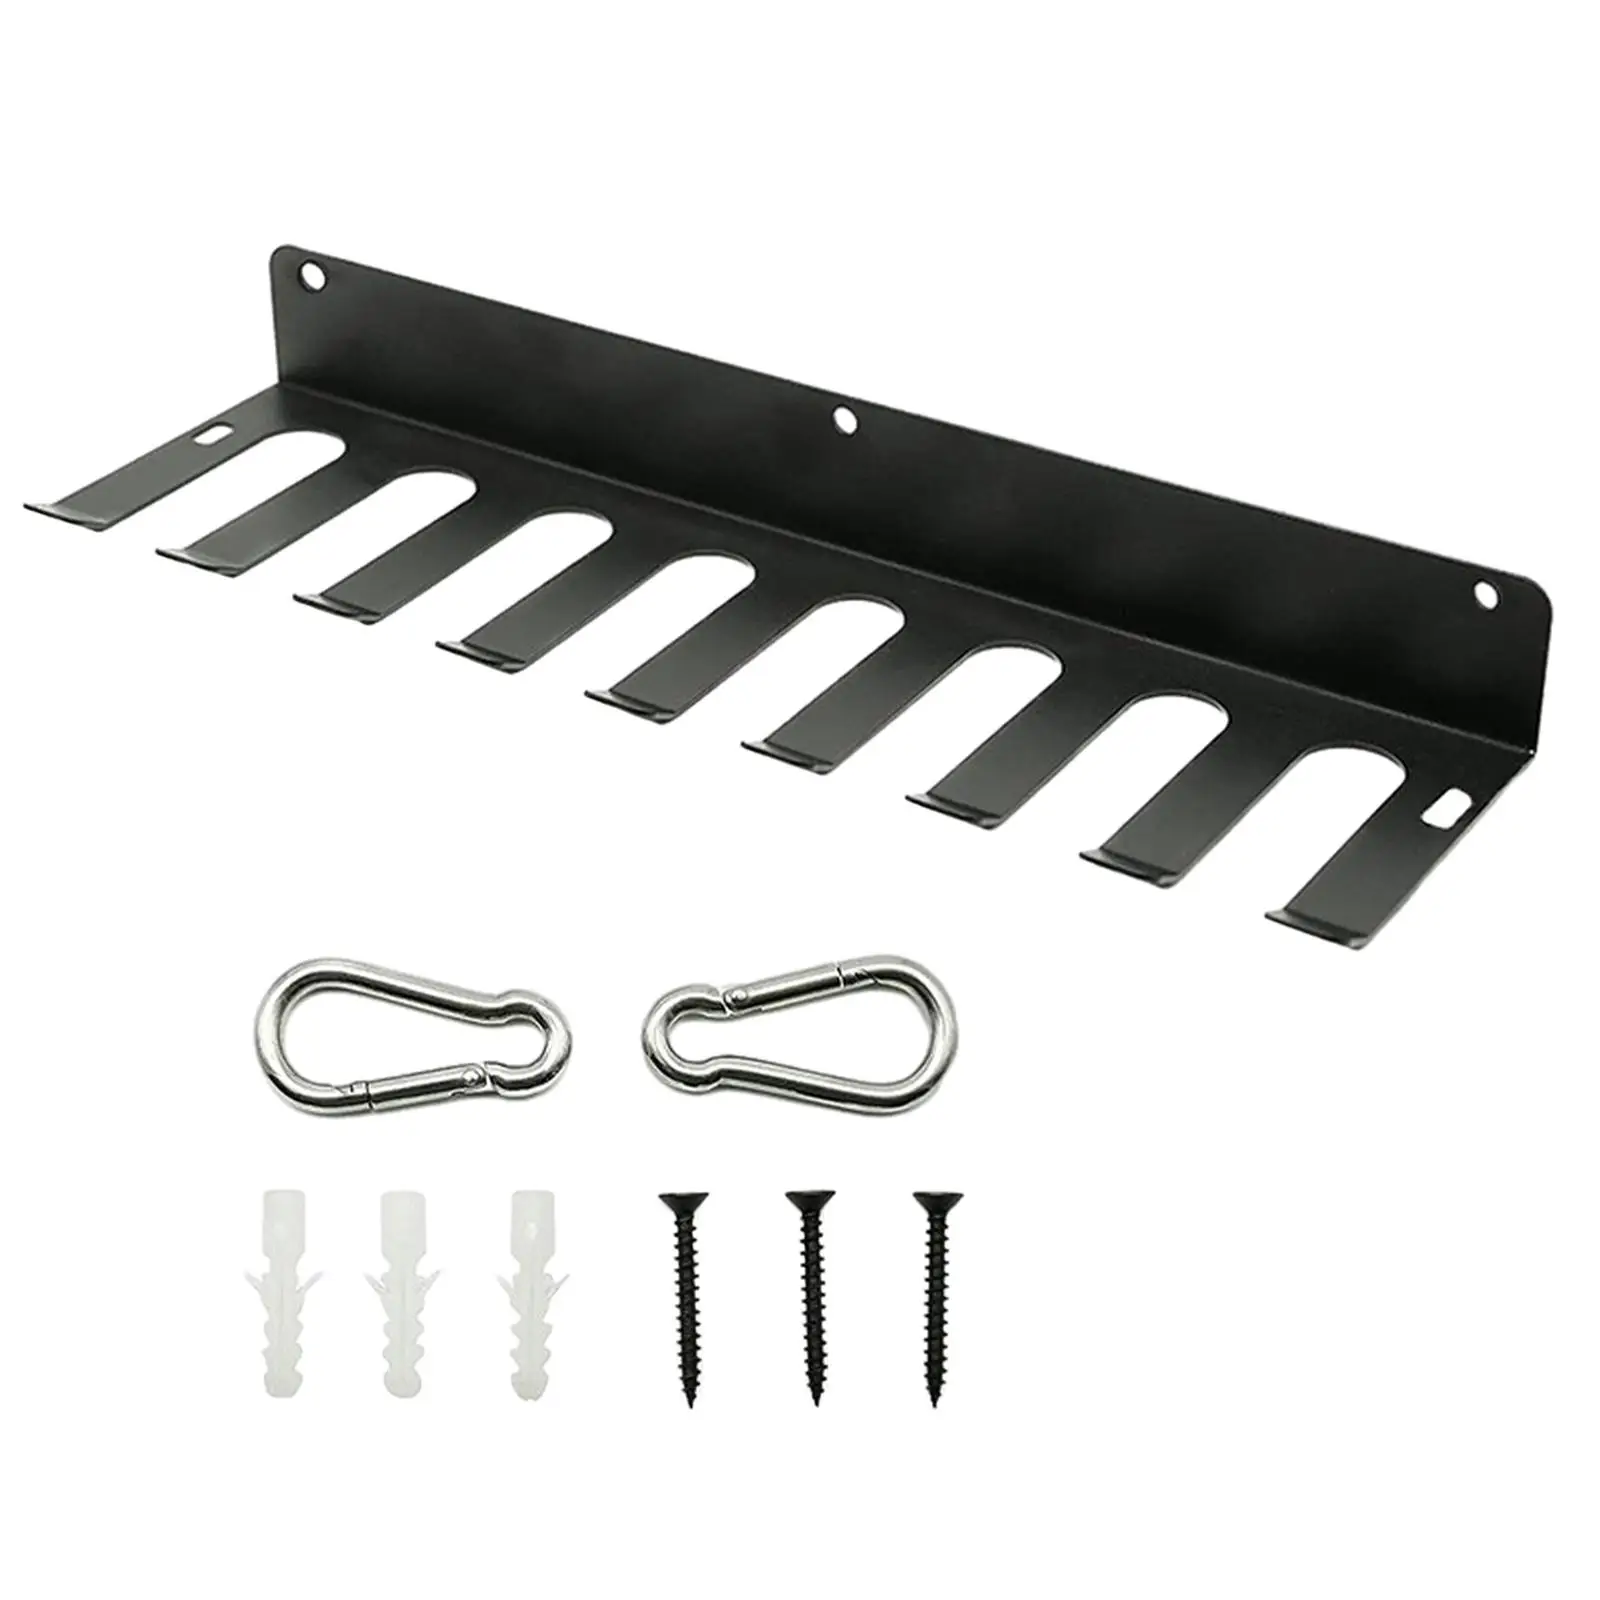 Baseball Bats Rack Wall Mount with Screws with 2 Snap Hooks Hanging Organizer